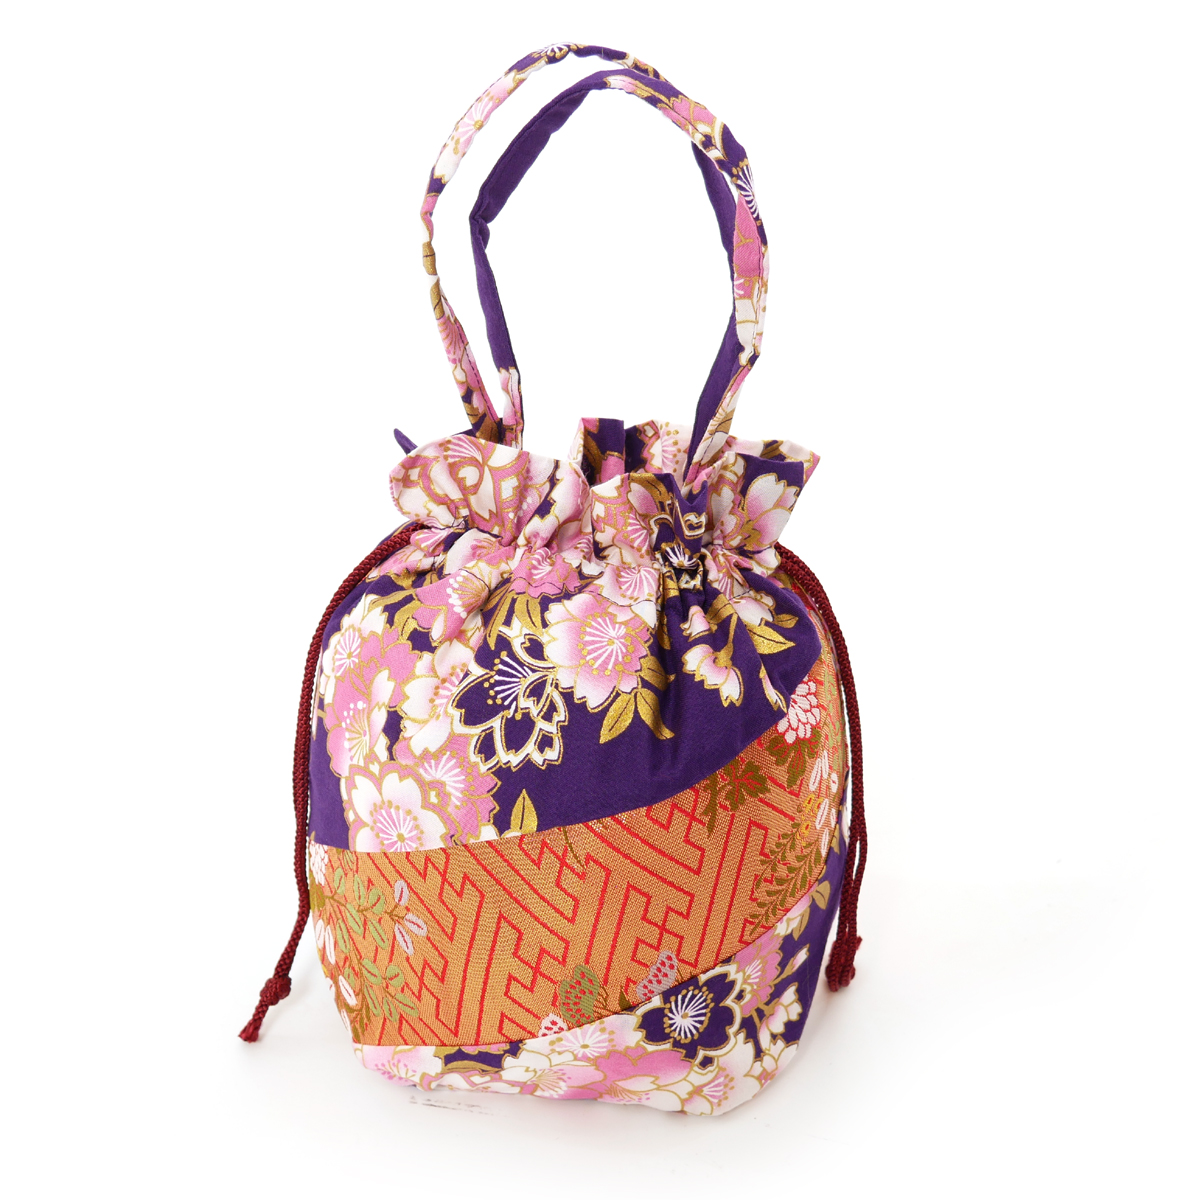 Japanese traditional purple kimono bag in polyester cotton, POUCH